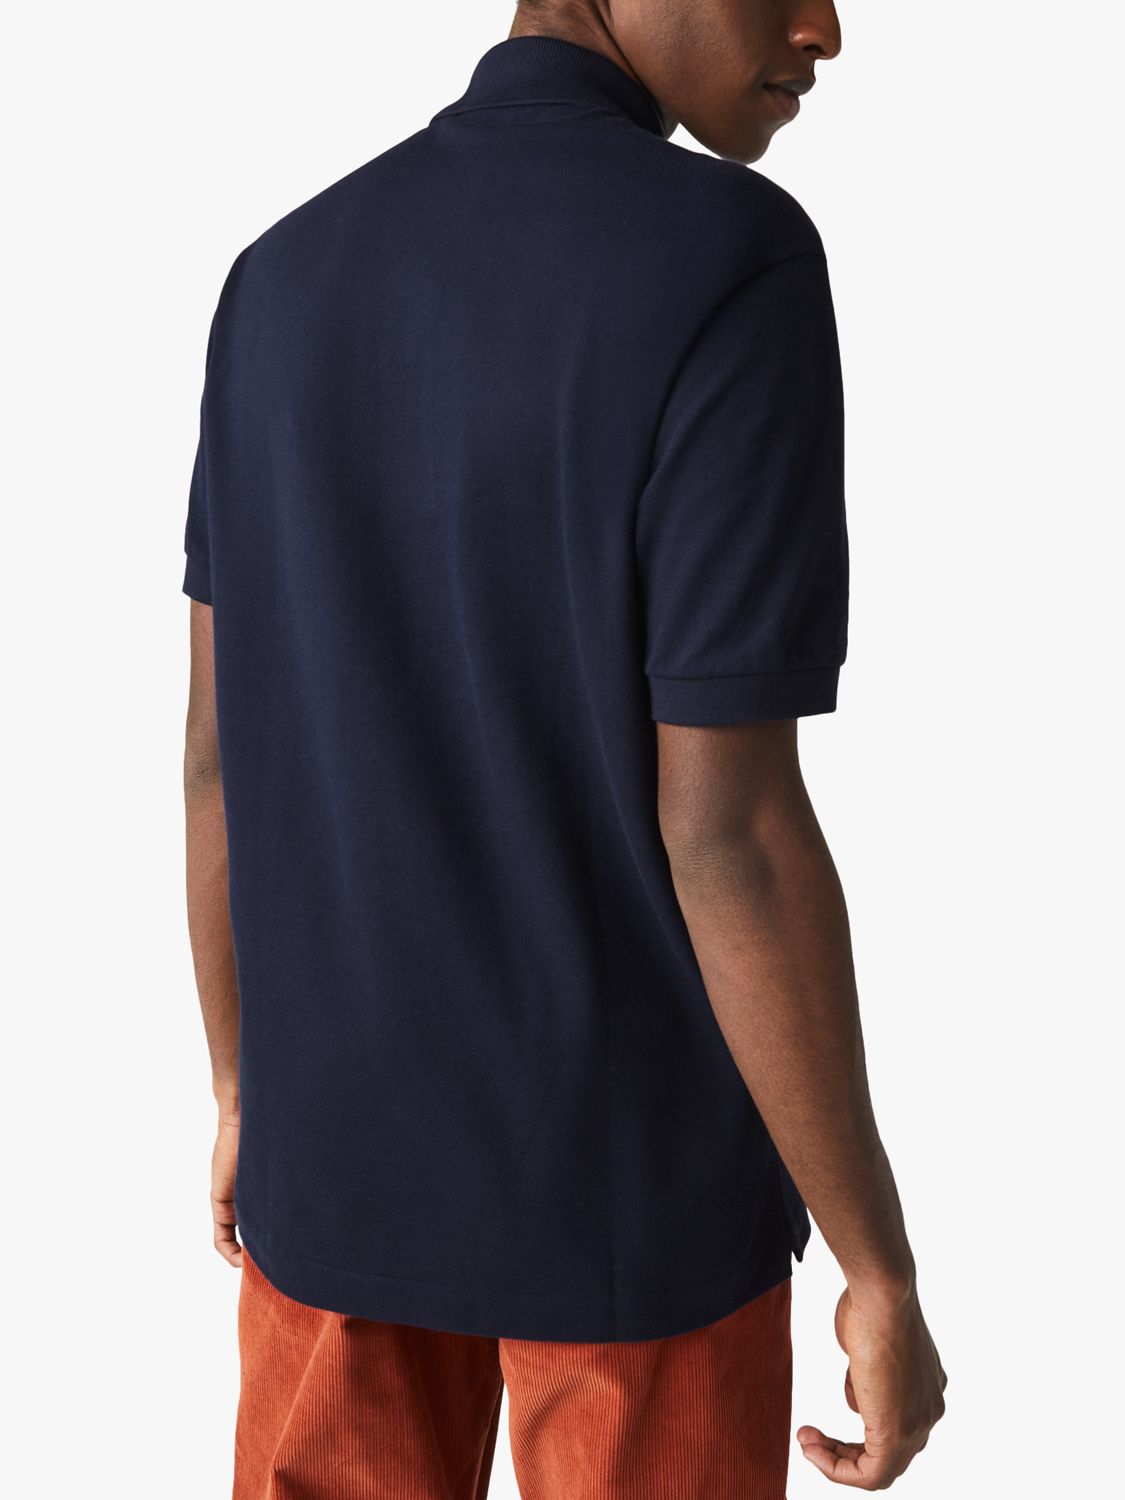 Lacoste L.12.12 Classic Regular Fit Short Sleeve Polo Shirt, Navy, S